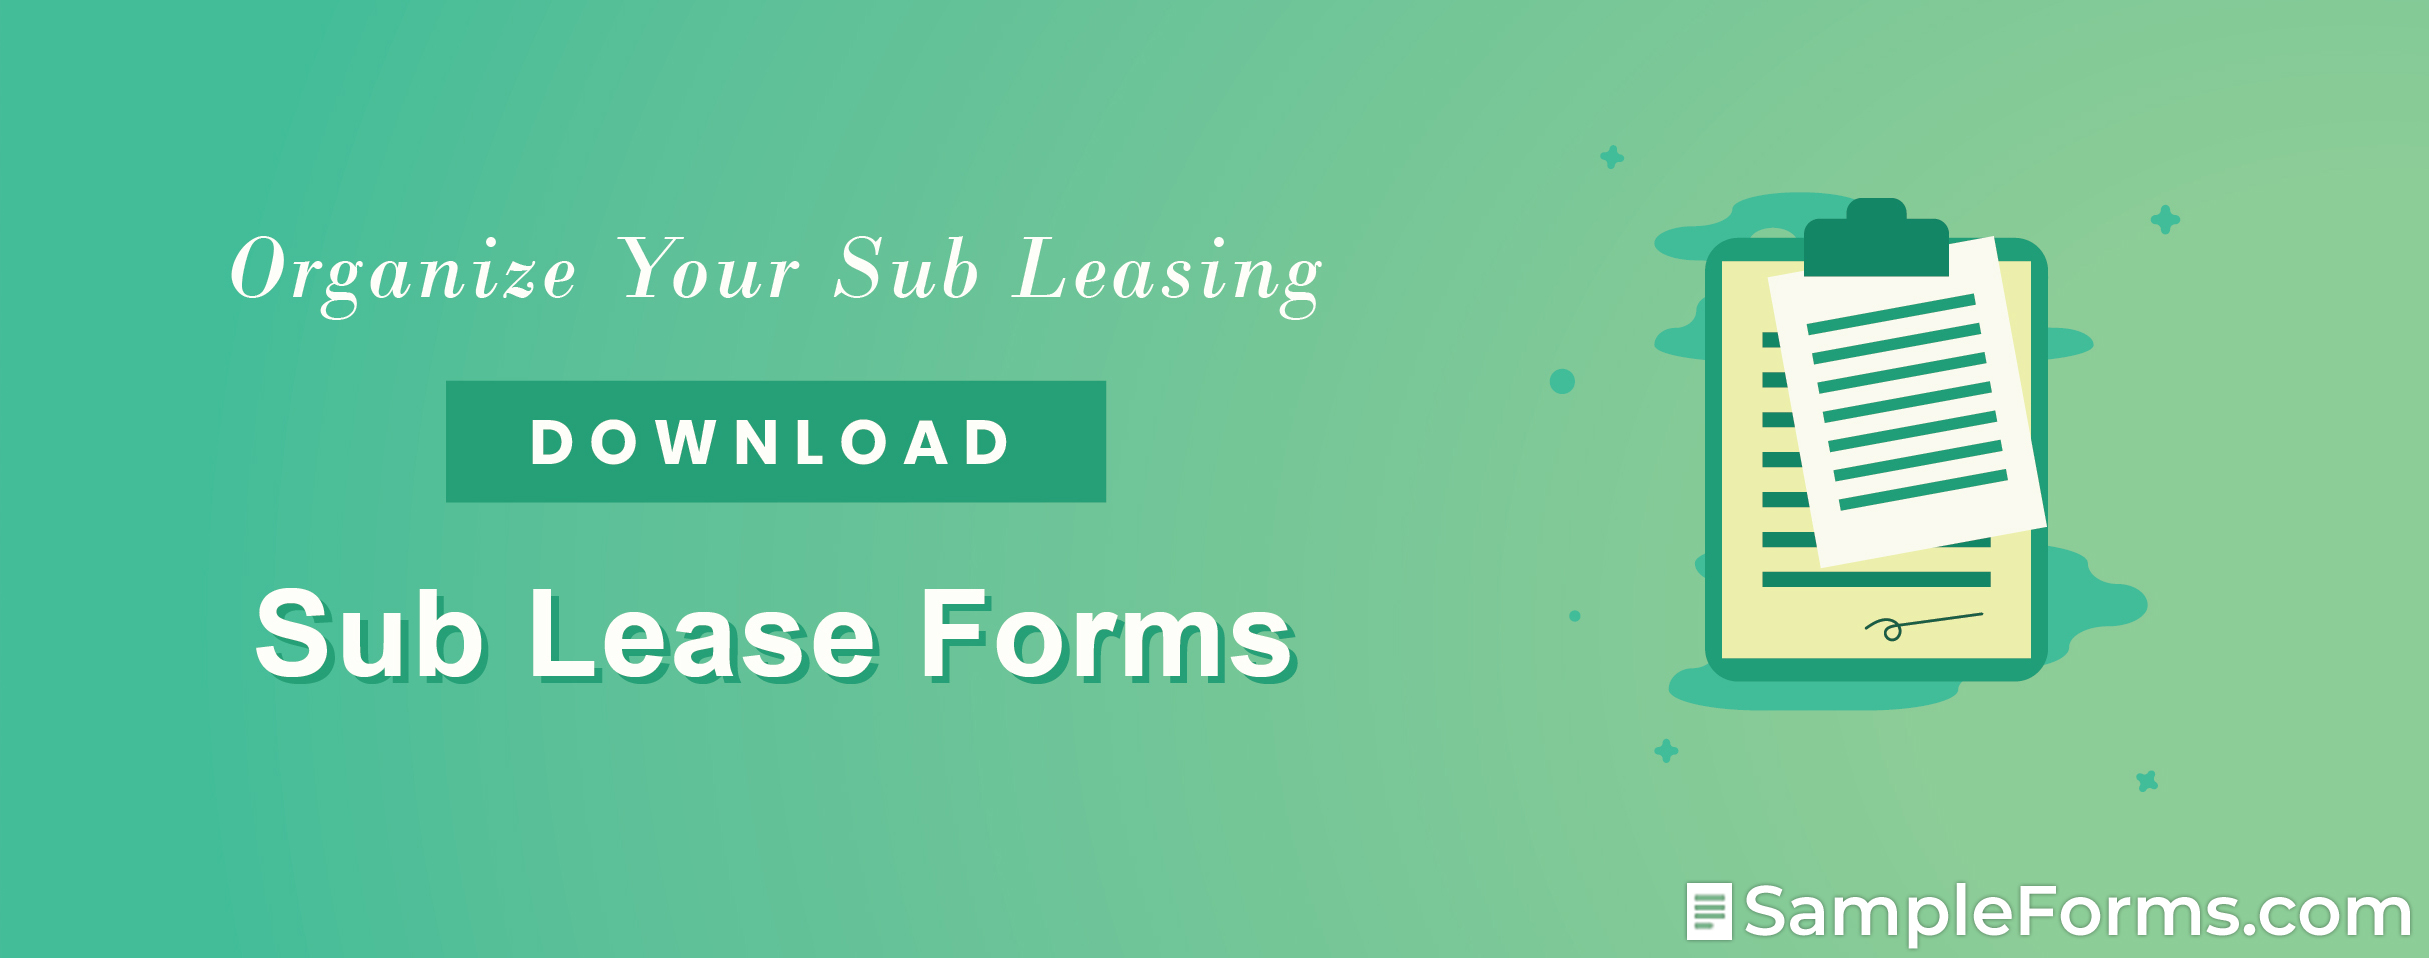 Sub Lease Forms